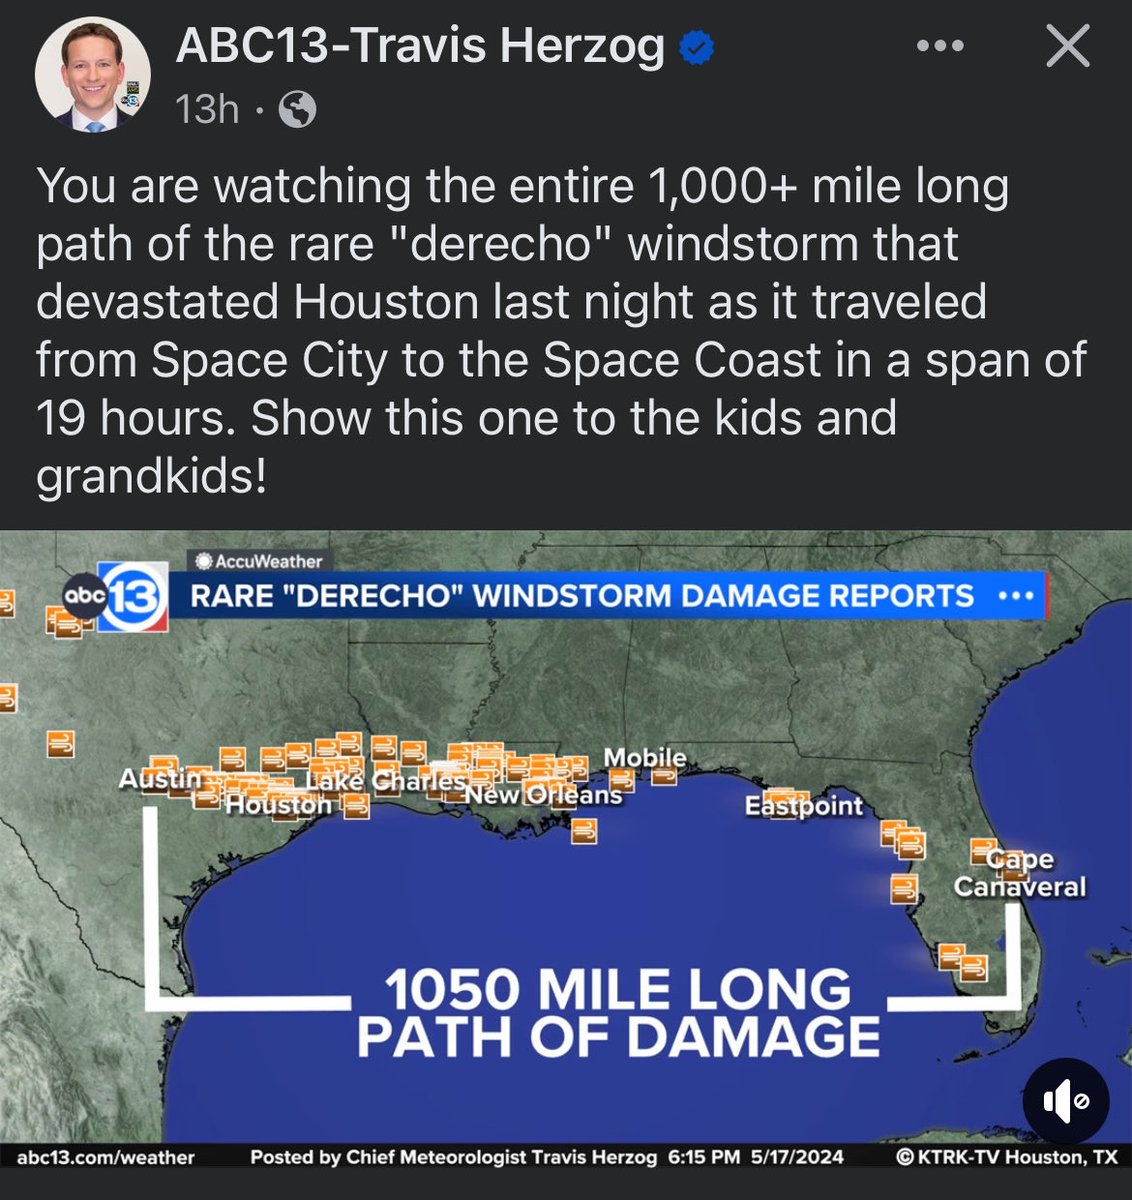 A derecho storm impacting over 1,000 miles of land is extremely rare. Labels and probabilities don’t matter to those affected. These storms should help us reflect on the little things that many lost. #Weather #Derecho #ExtremeWeather #Gratitude